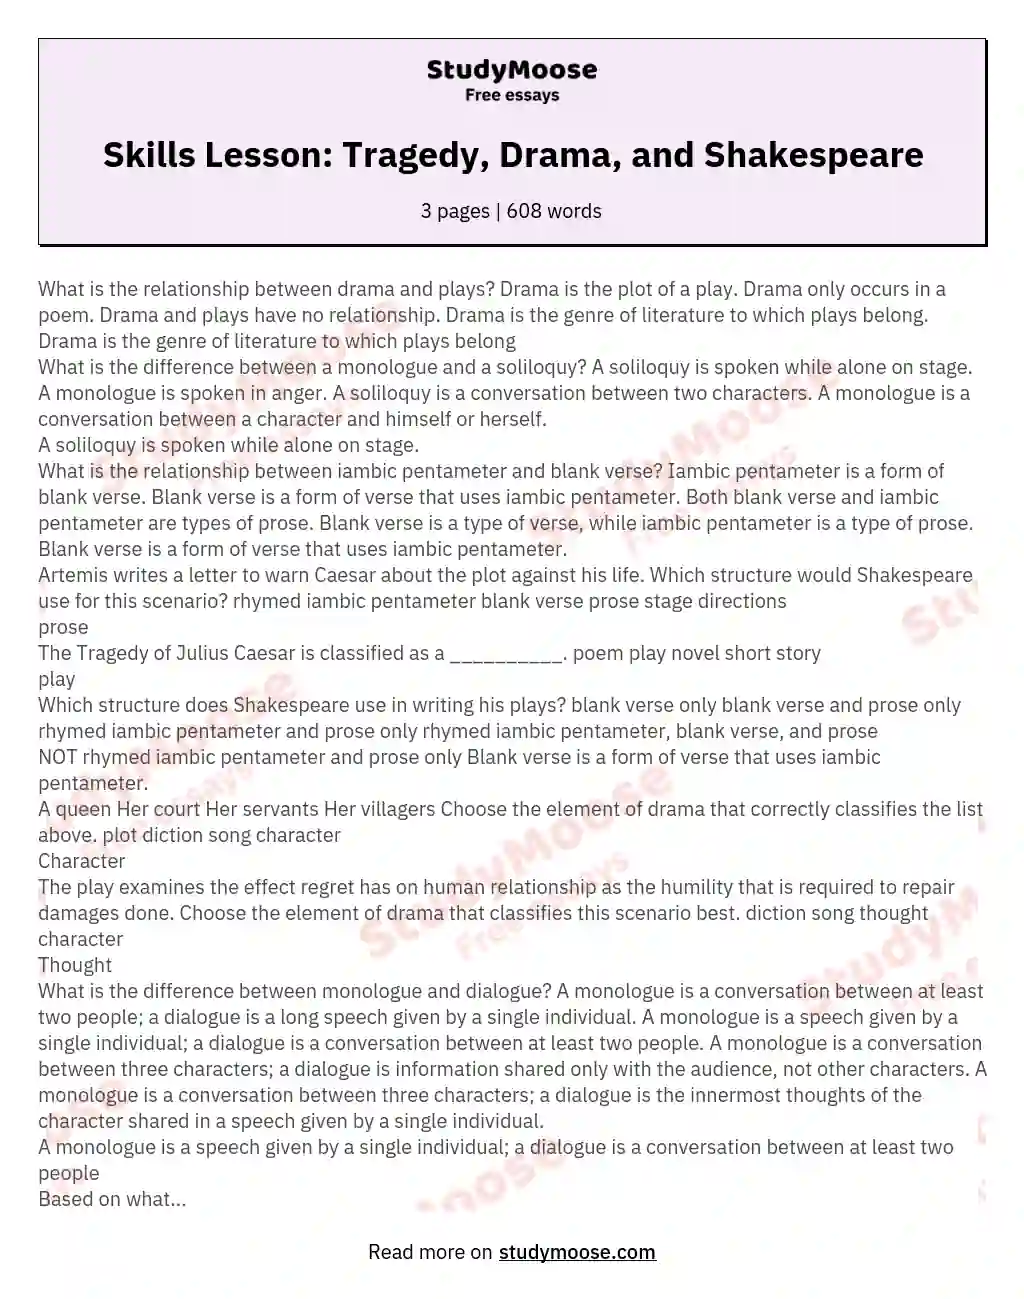 Skills Lesson: Tragedy, Drama, and Shakespeare essay